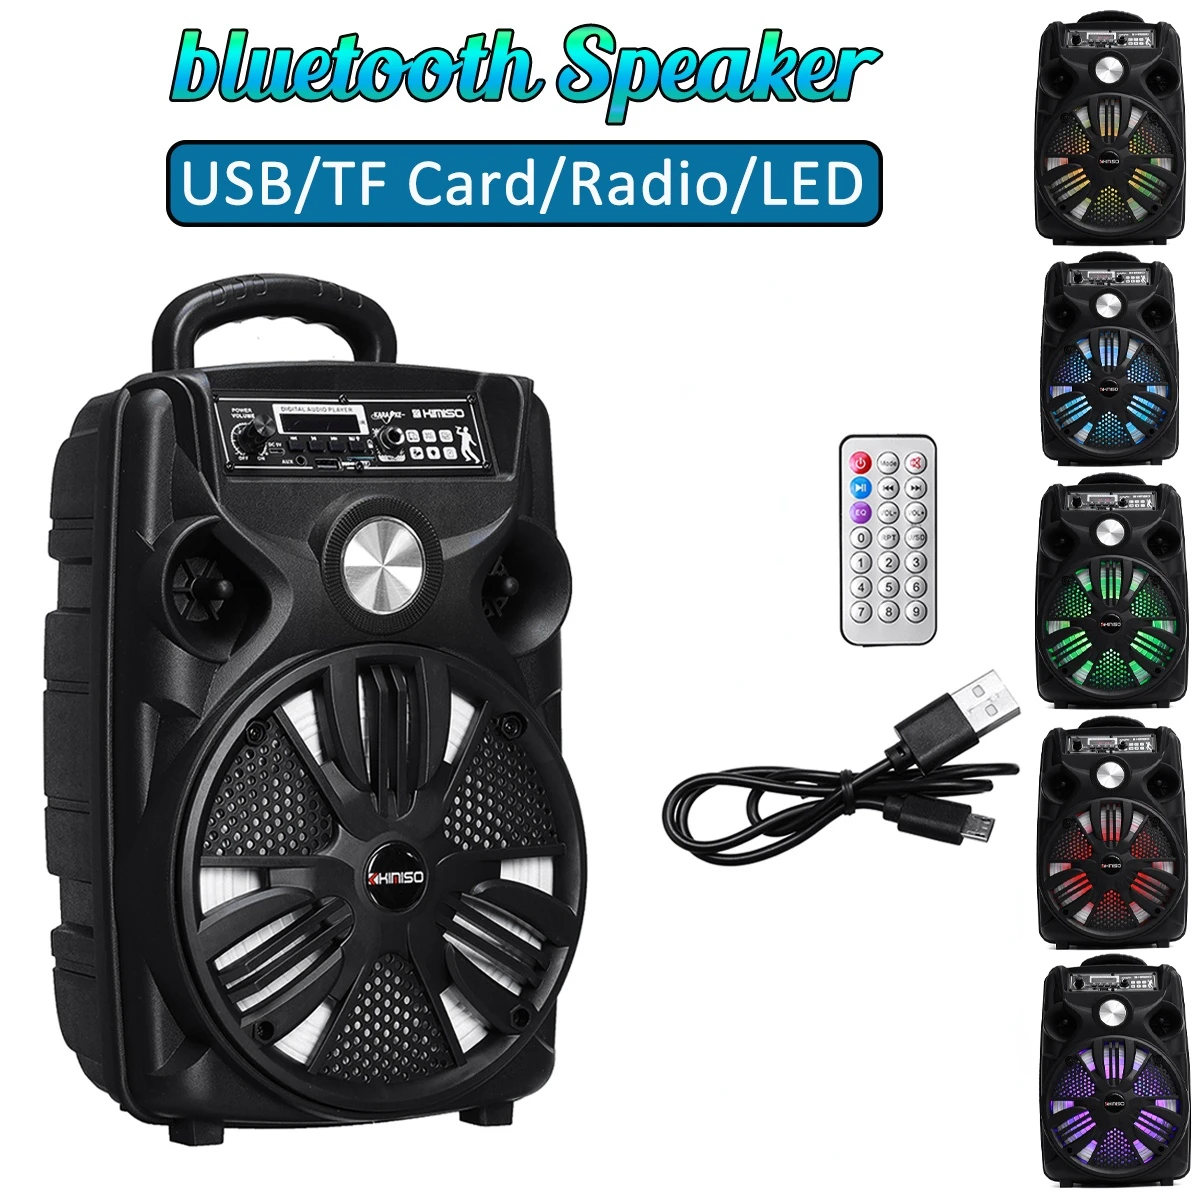 8 Inch LED Display Portable Bluetooth 5.0 Wireless Speaker Loud Outdoor With TF Card USB Radio enlarge